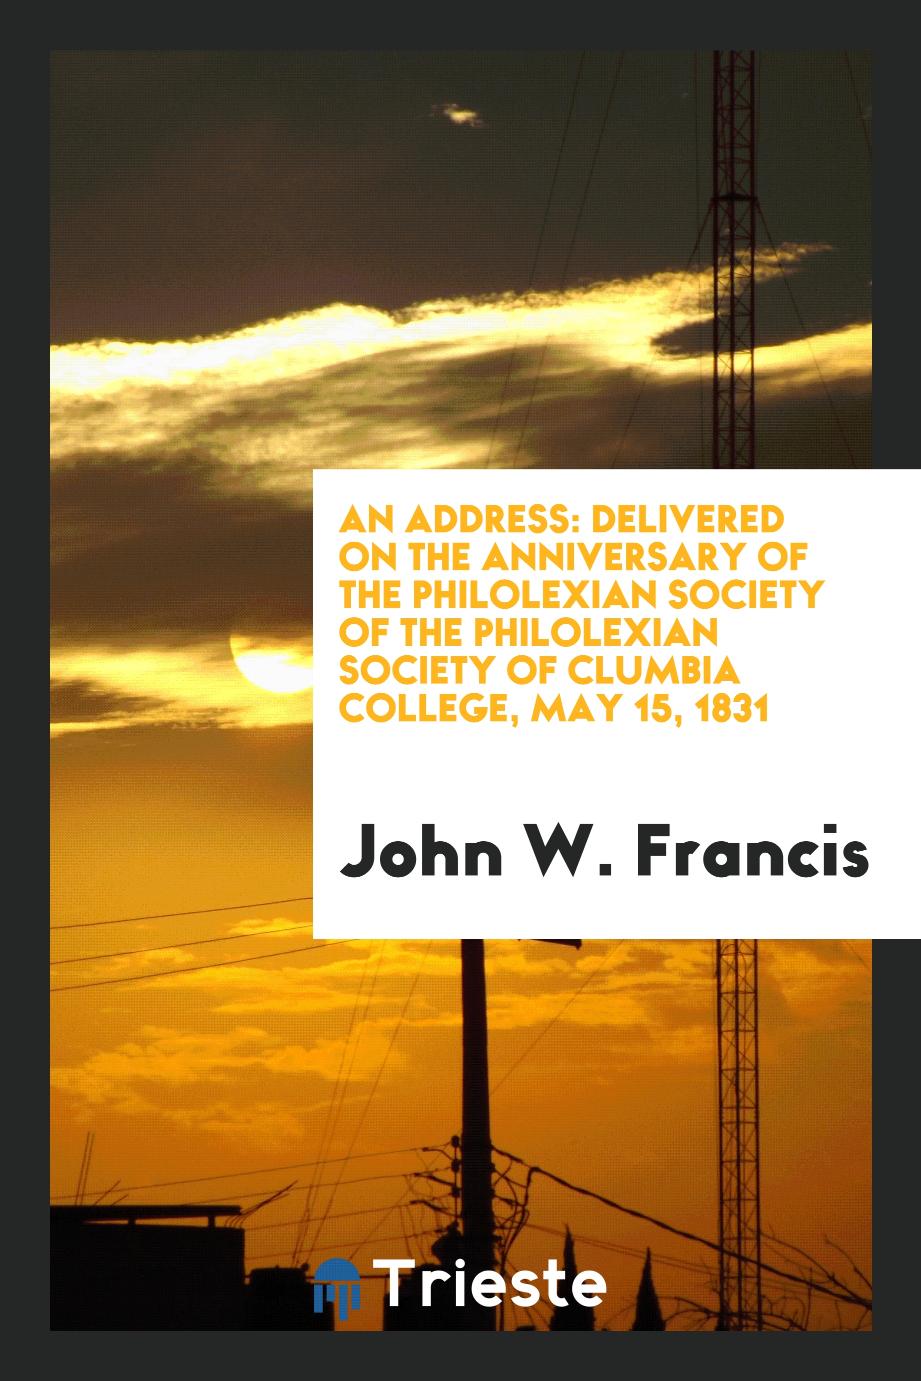 An Address: Delivered on the Anniversary of the Philolexian Society of the philolexian society of Clumbia College, May 15, 1831